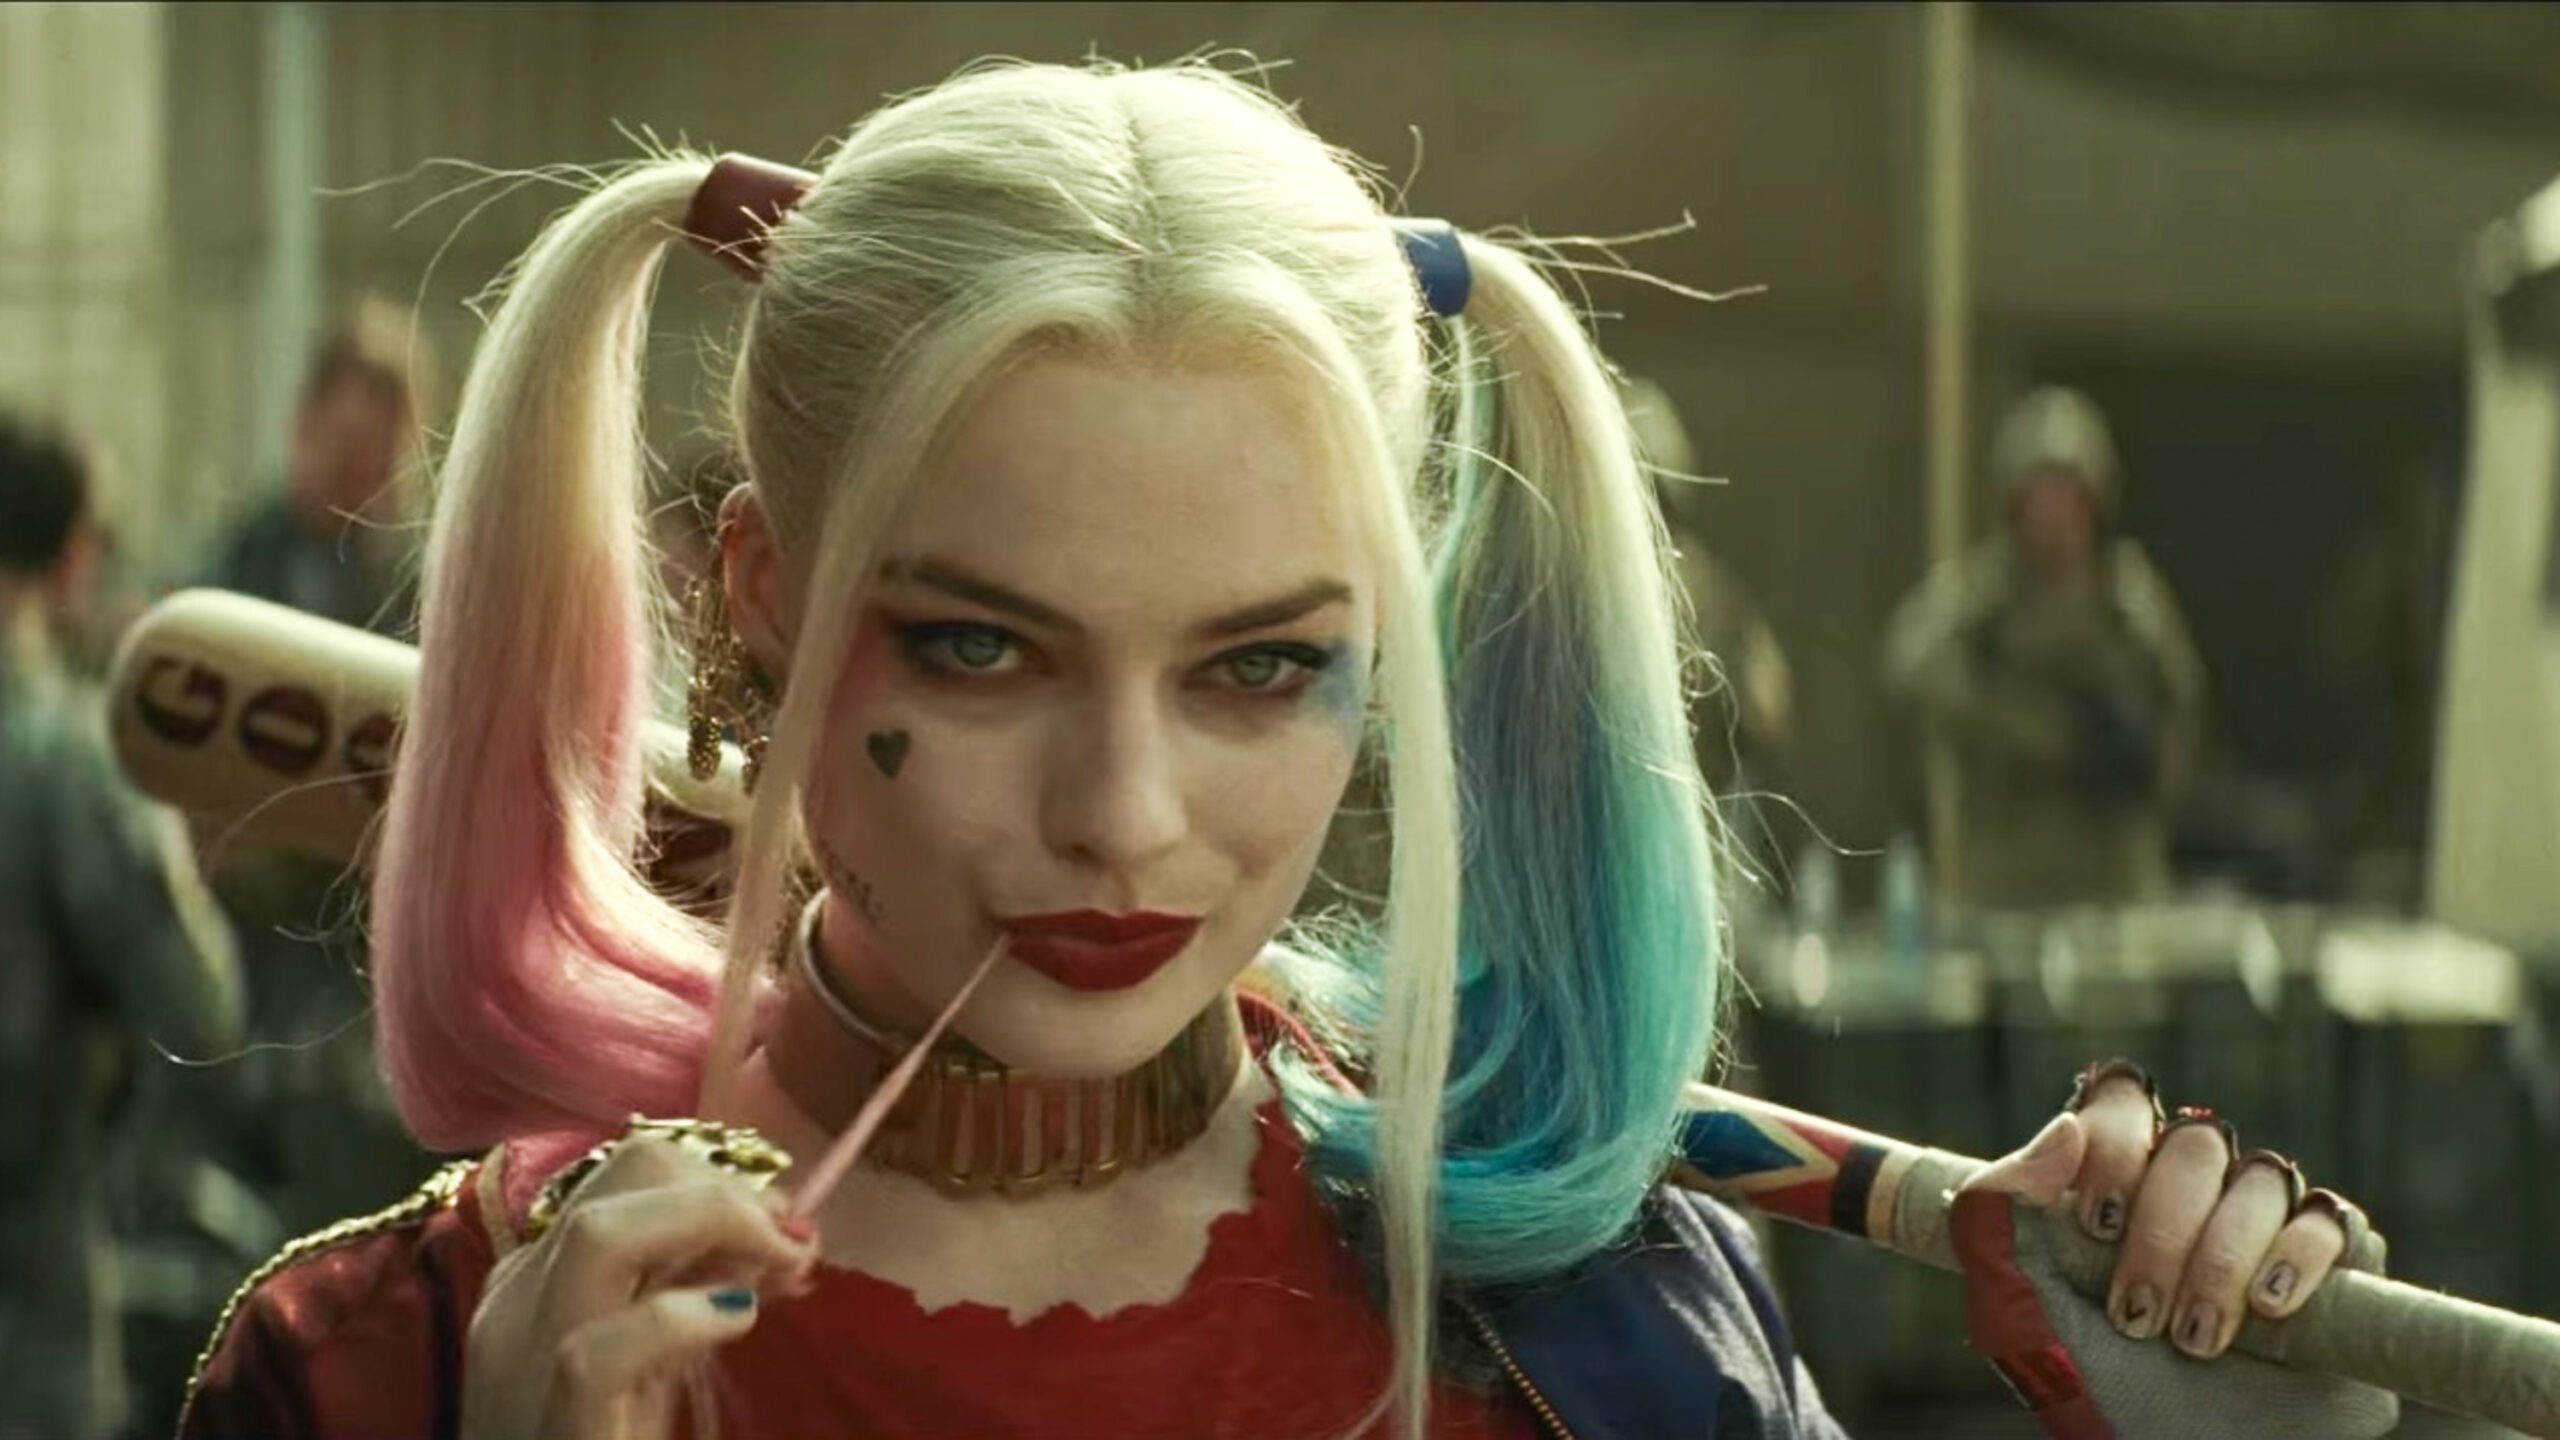 WATCH: ‘Suicide Squad’ trailer drops with Deadshot, Joker, and more